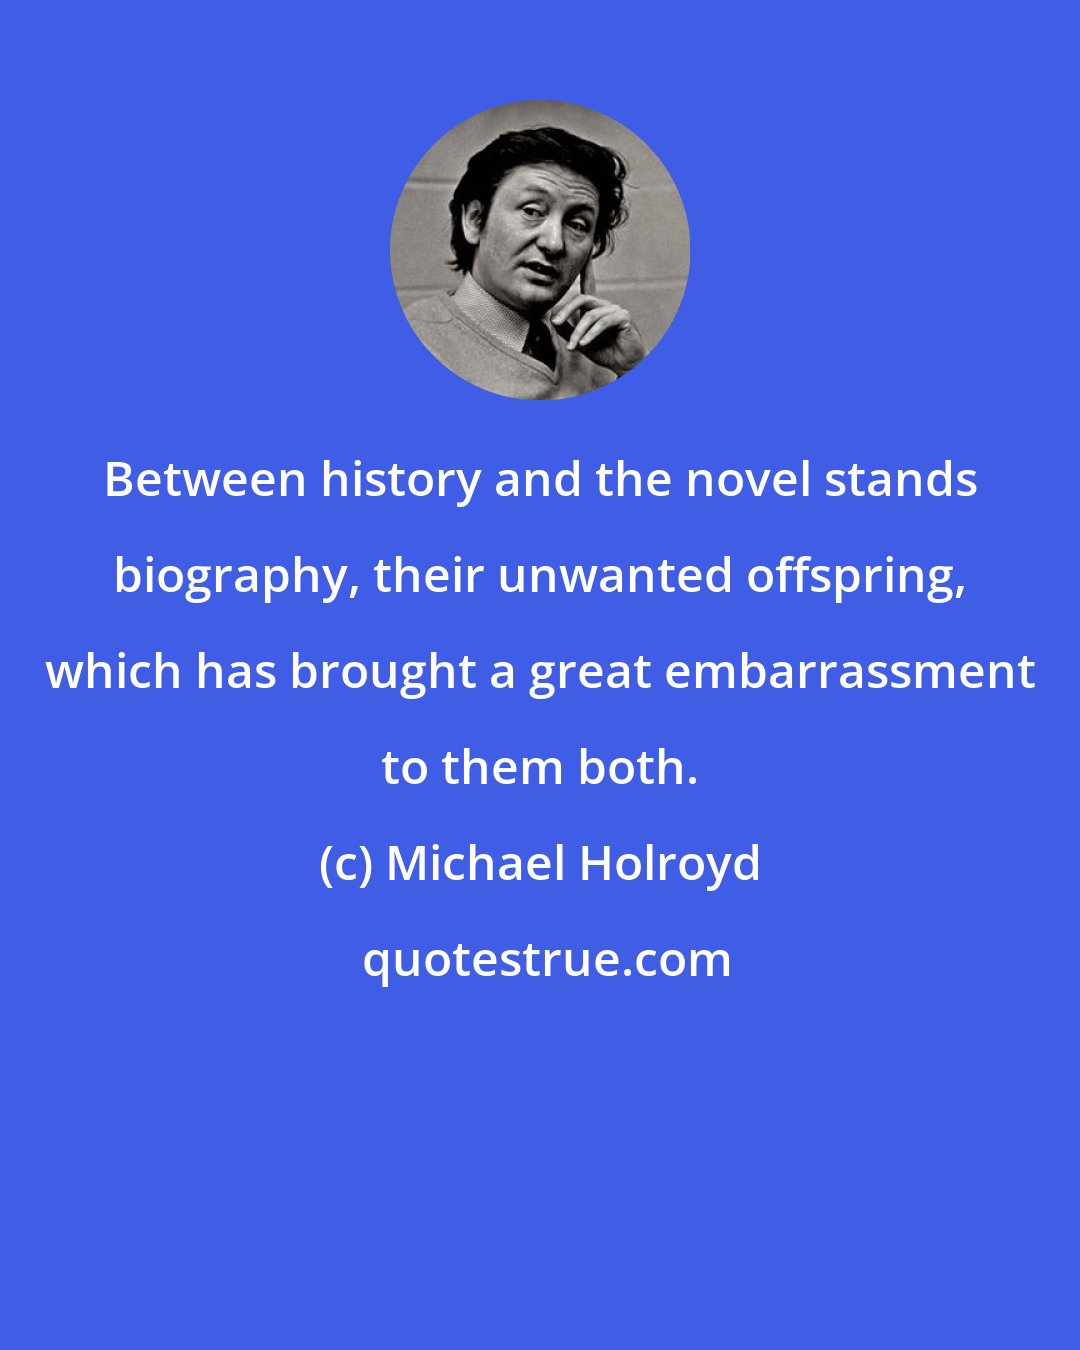 Michael Holroyd: Between history and the novel stands biography, their unwanted offspring, which has brought a great embarrassment to them both.